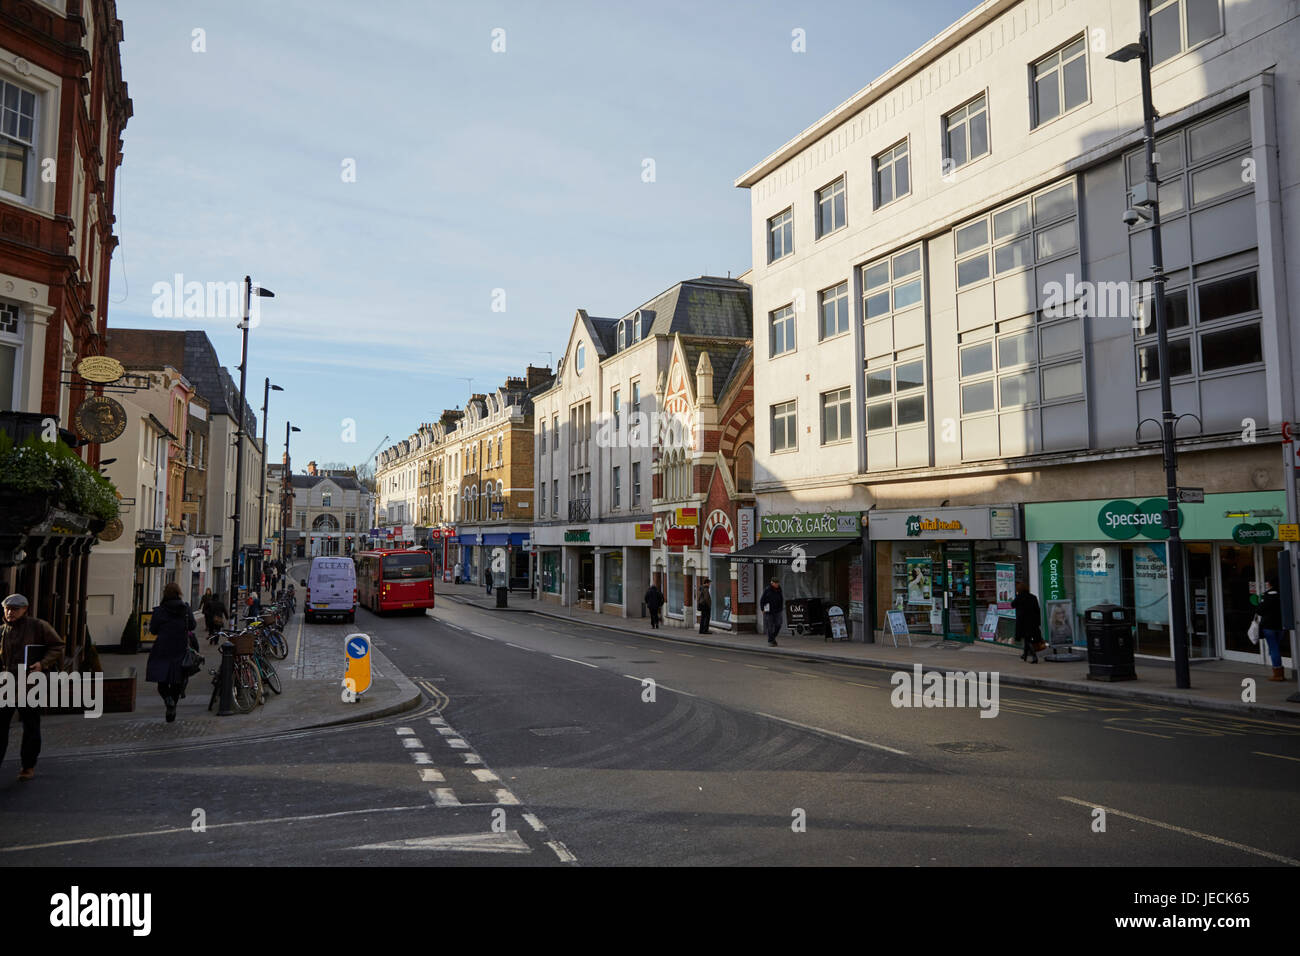 Richmond High Street High Resolution Stock Photography and Images - Alamy